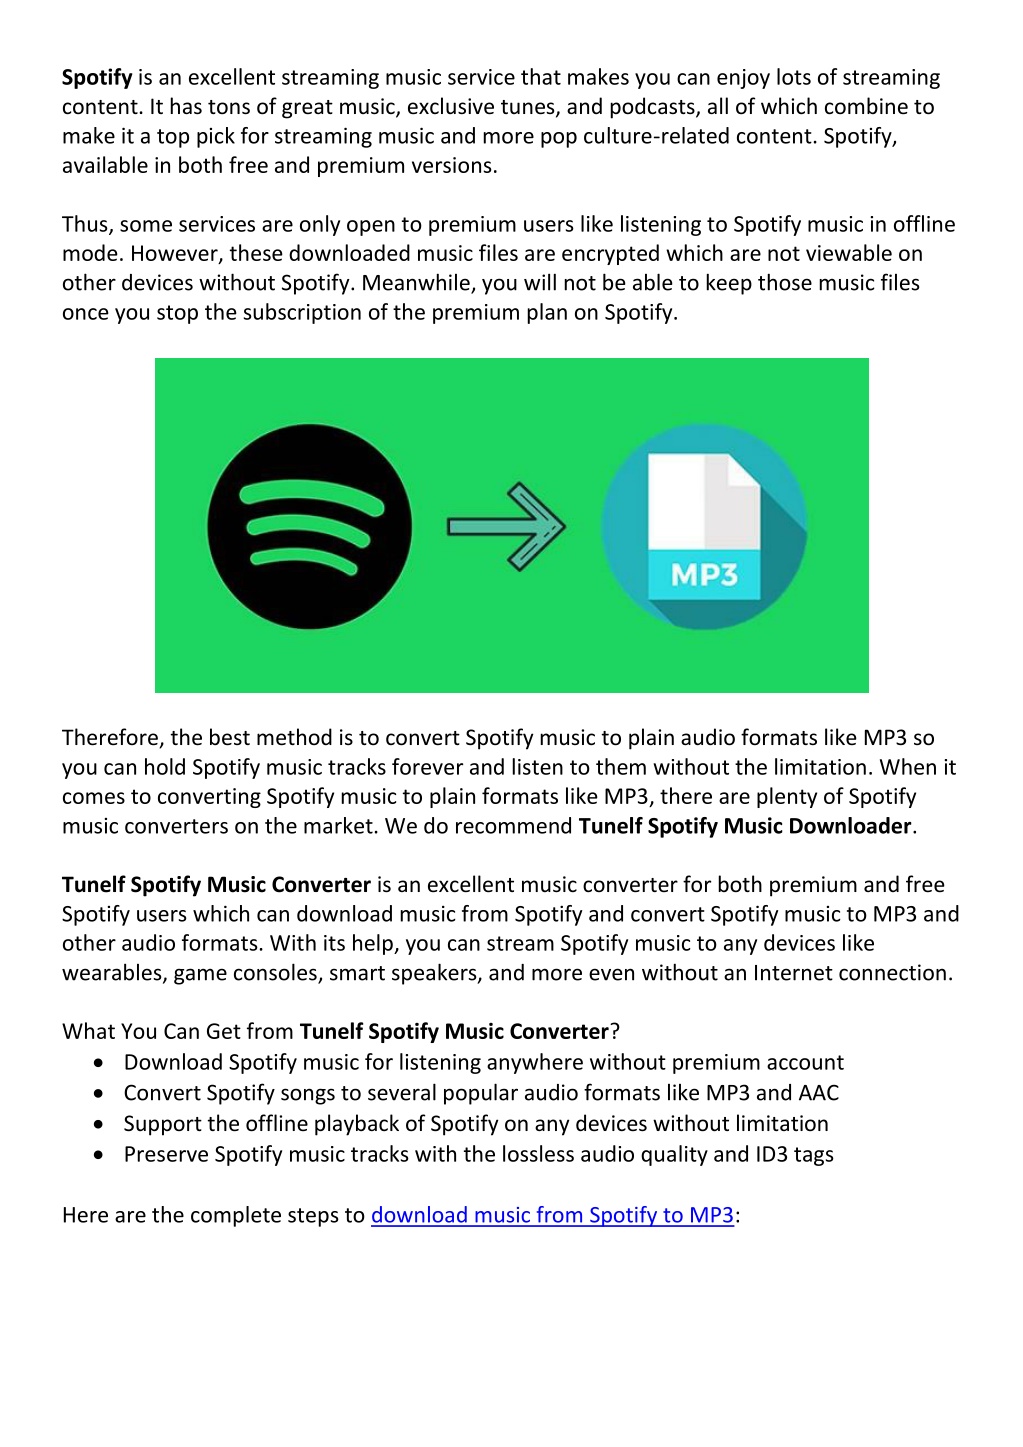 How to Download Spotify Songs to MP3 for Free